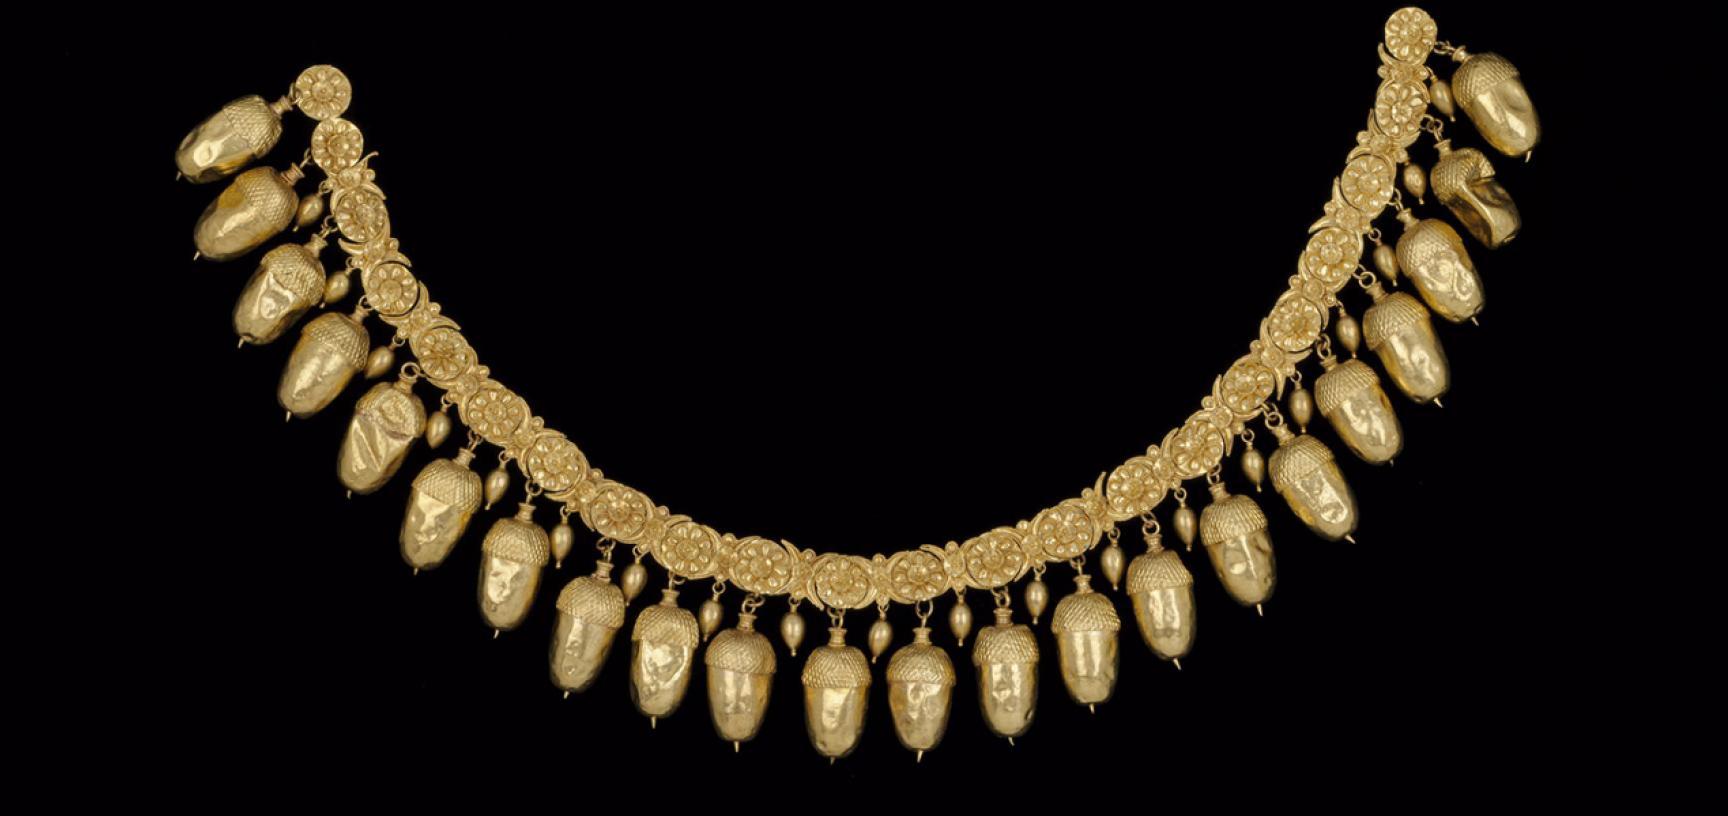 Gold necklace of acorns, lotuses and rosettes, Greek, 5th century BC